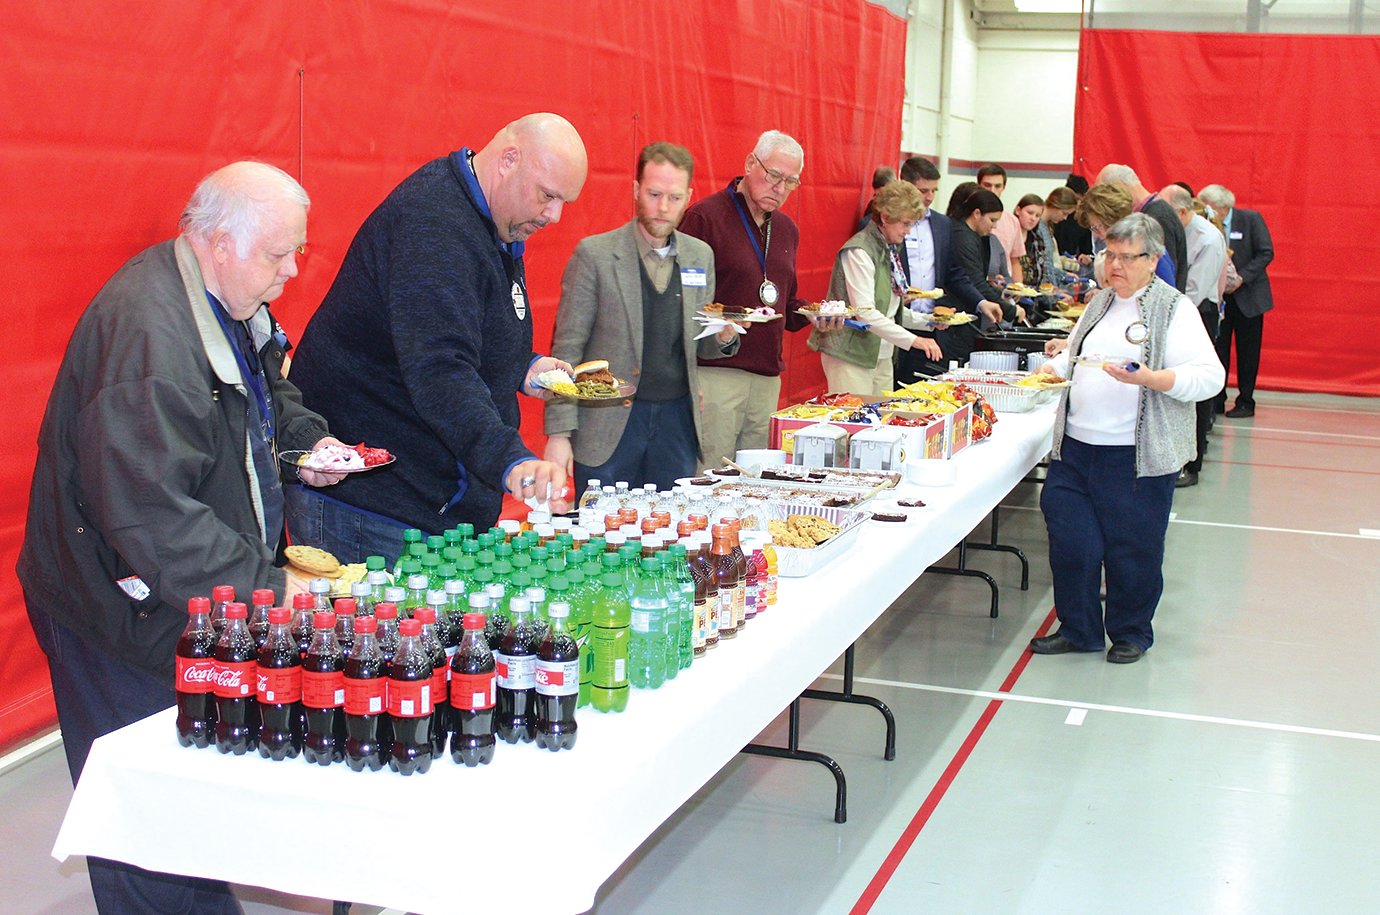 Rotarians and visitors alike were treated to a catered meal Wednesday during Southmont's Interact Club luncheon at Southmont High School. More than 100 people attended the event which is set to kick off a series of concerts and food festivals this year to celebrate 100 years in Crawfordsville.